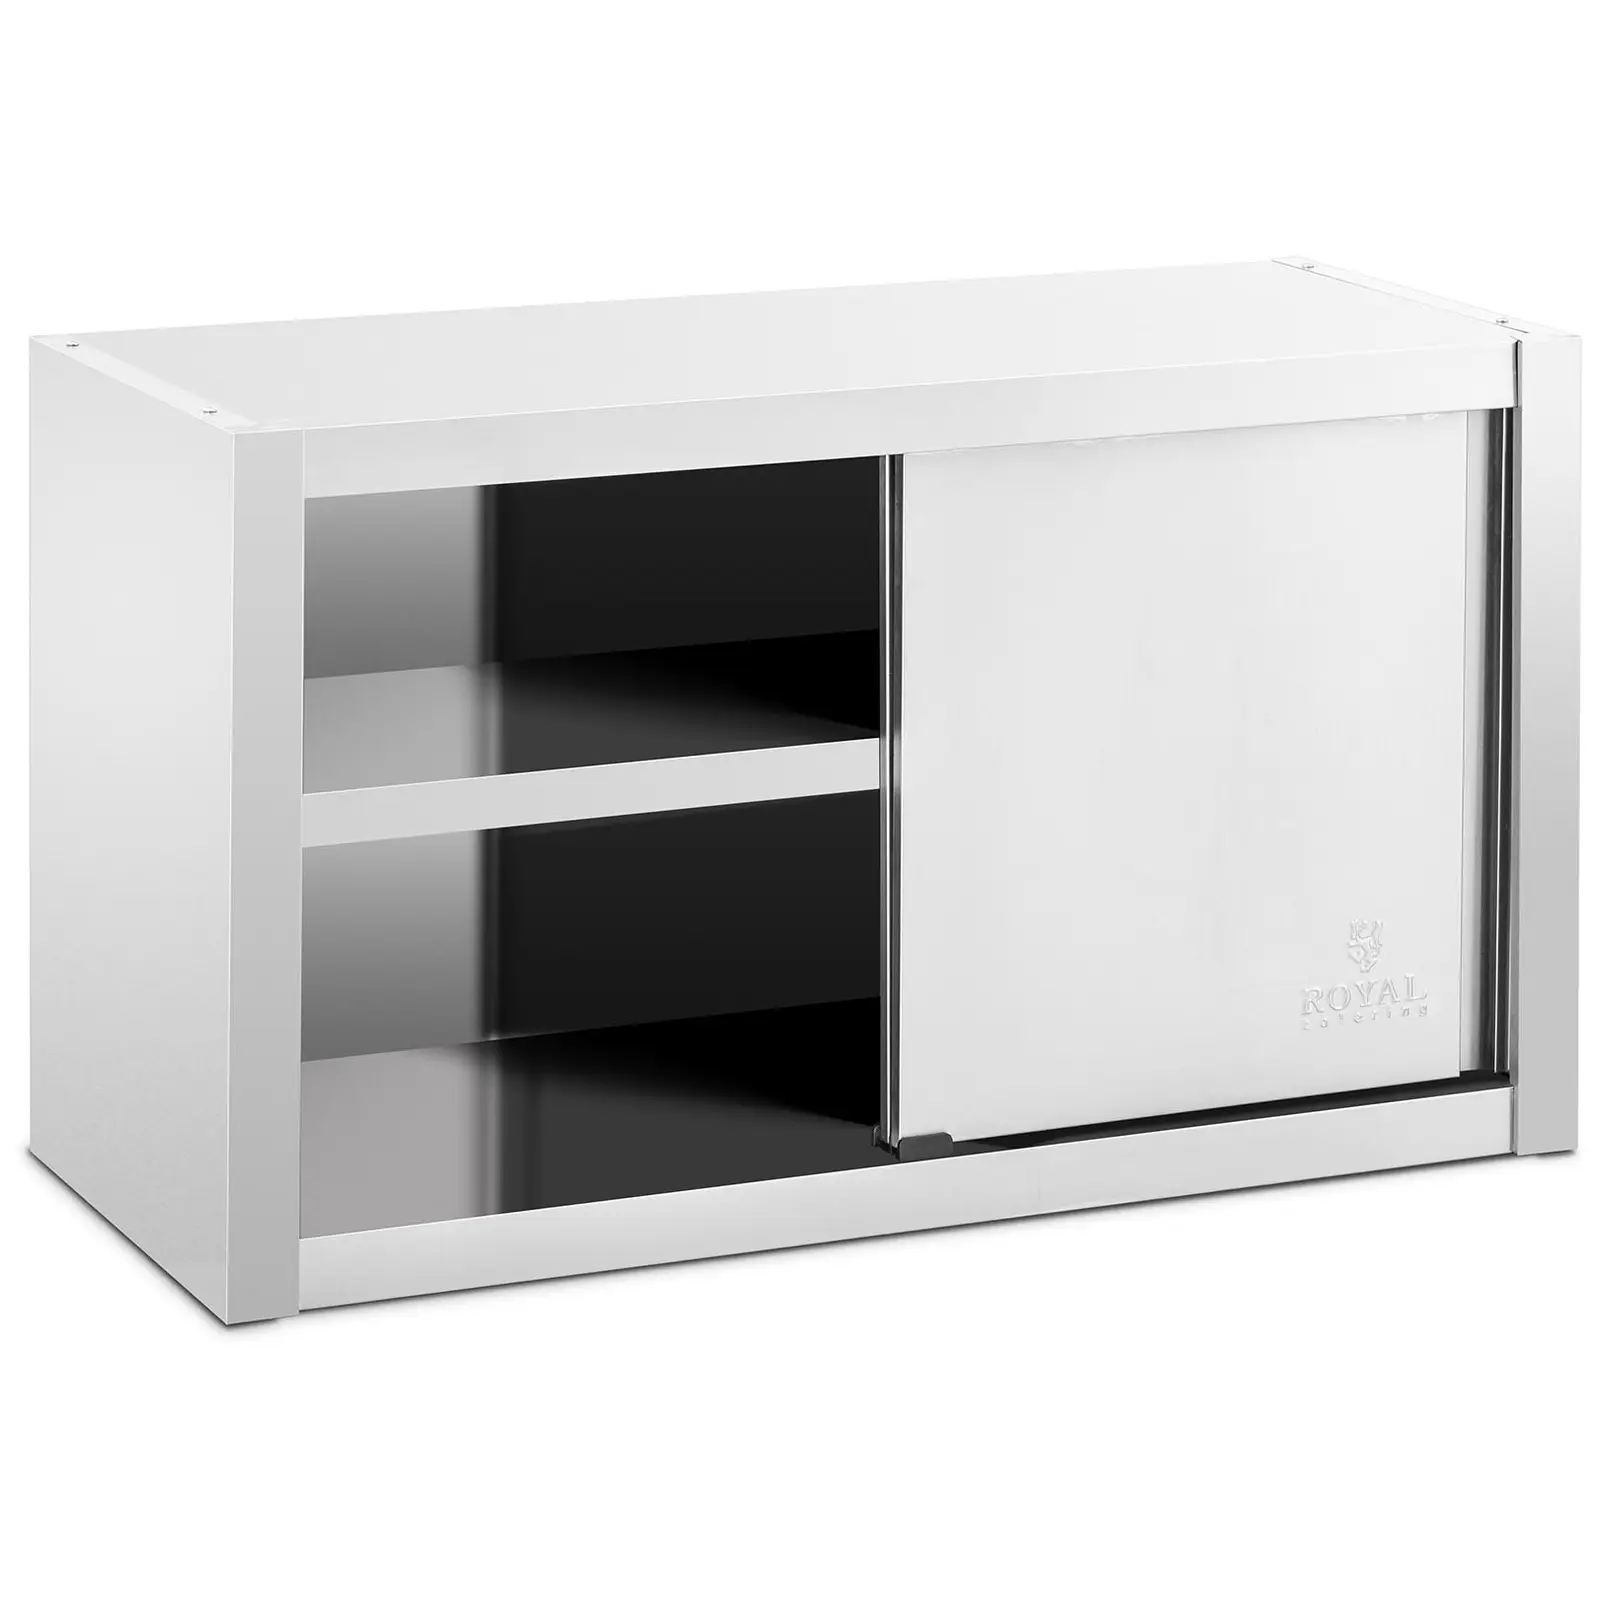 Factory second Stainless Steel Hanging Cabinet - 100 x 45 cm